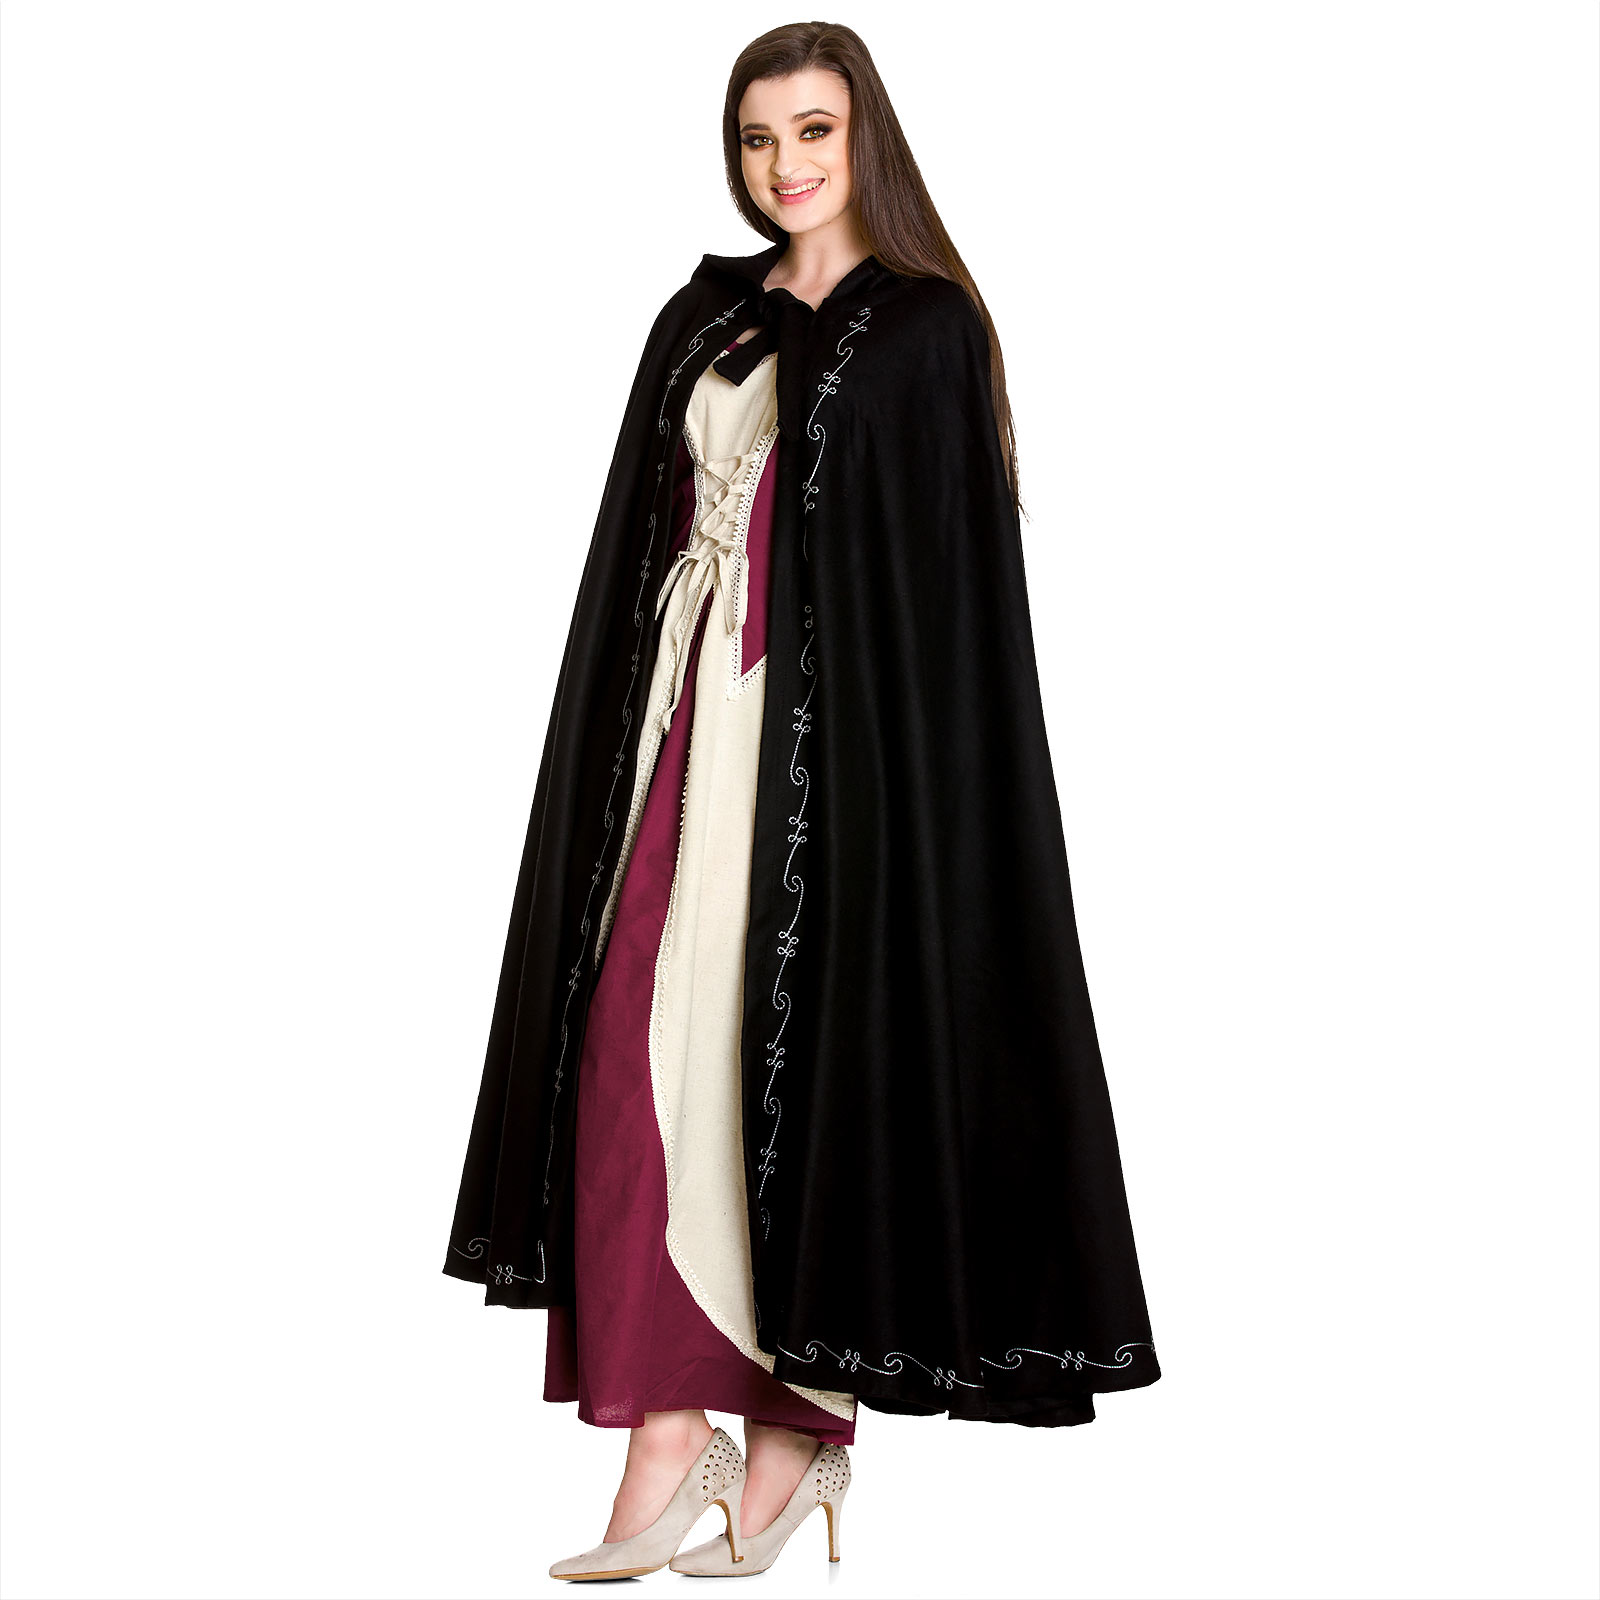 High Middle Ages Cloak